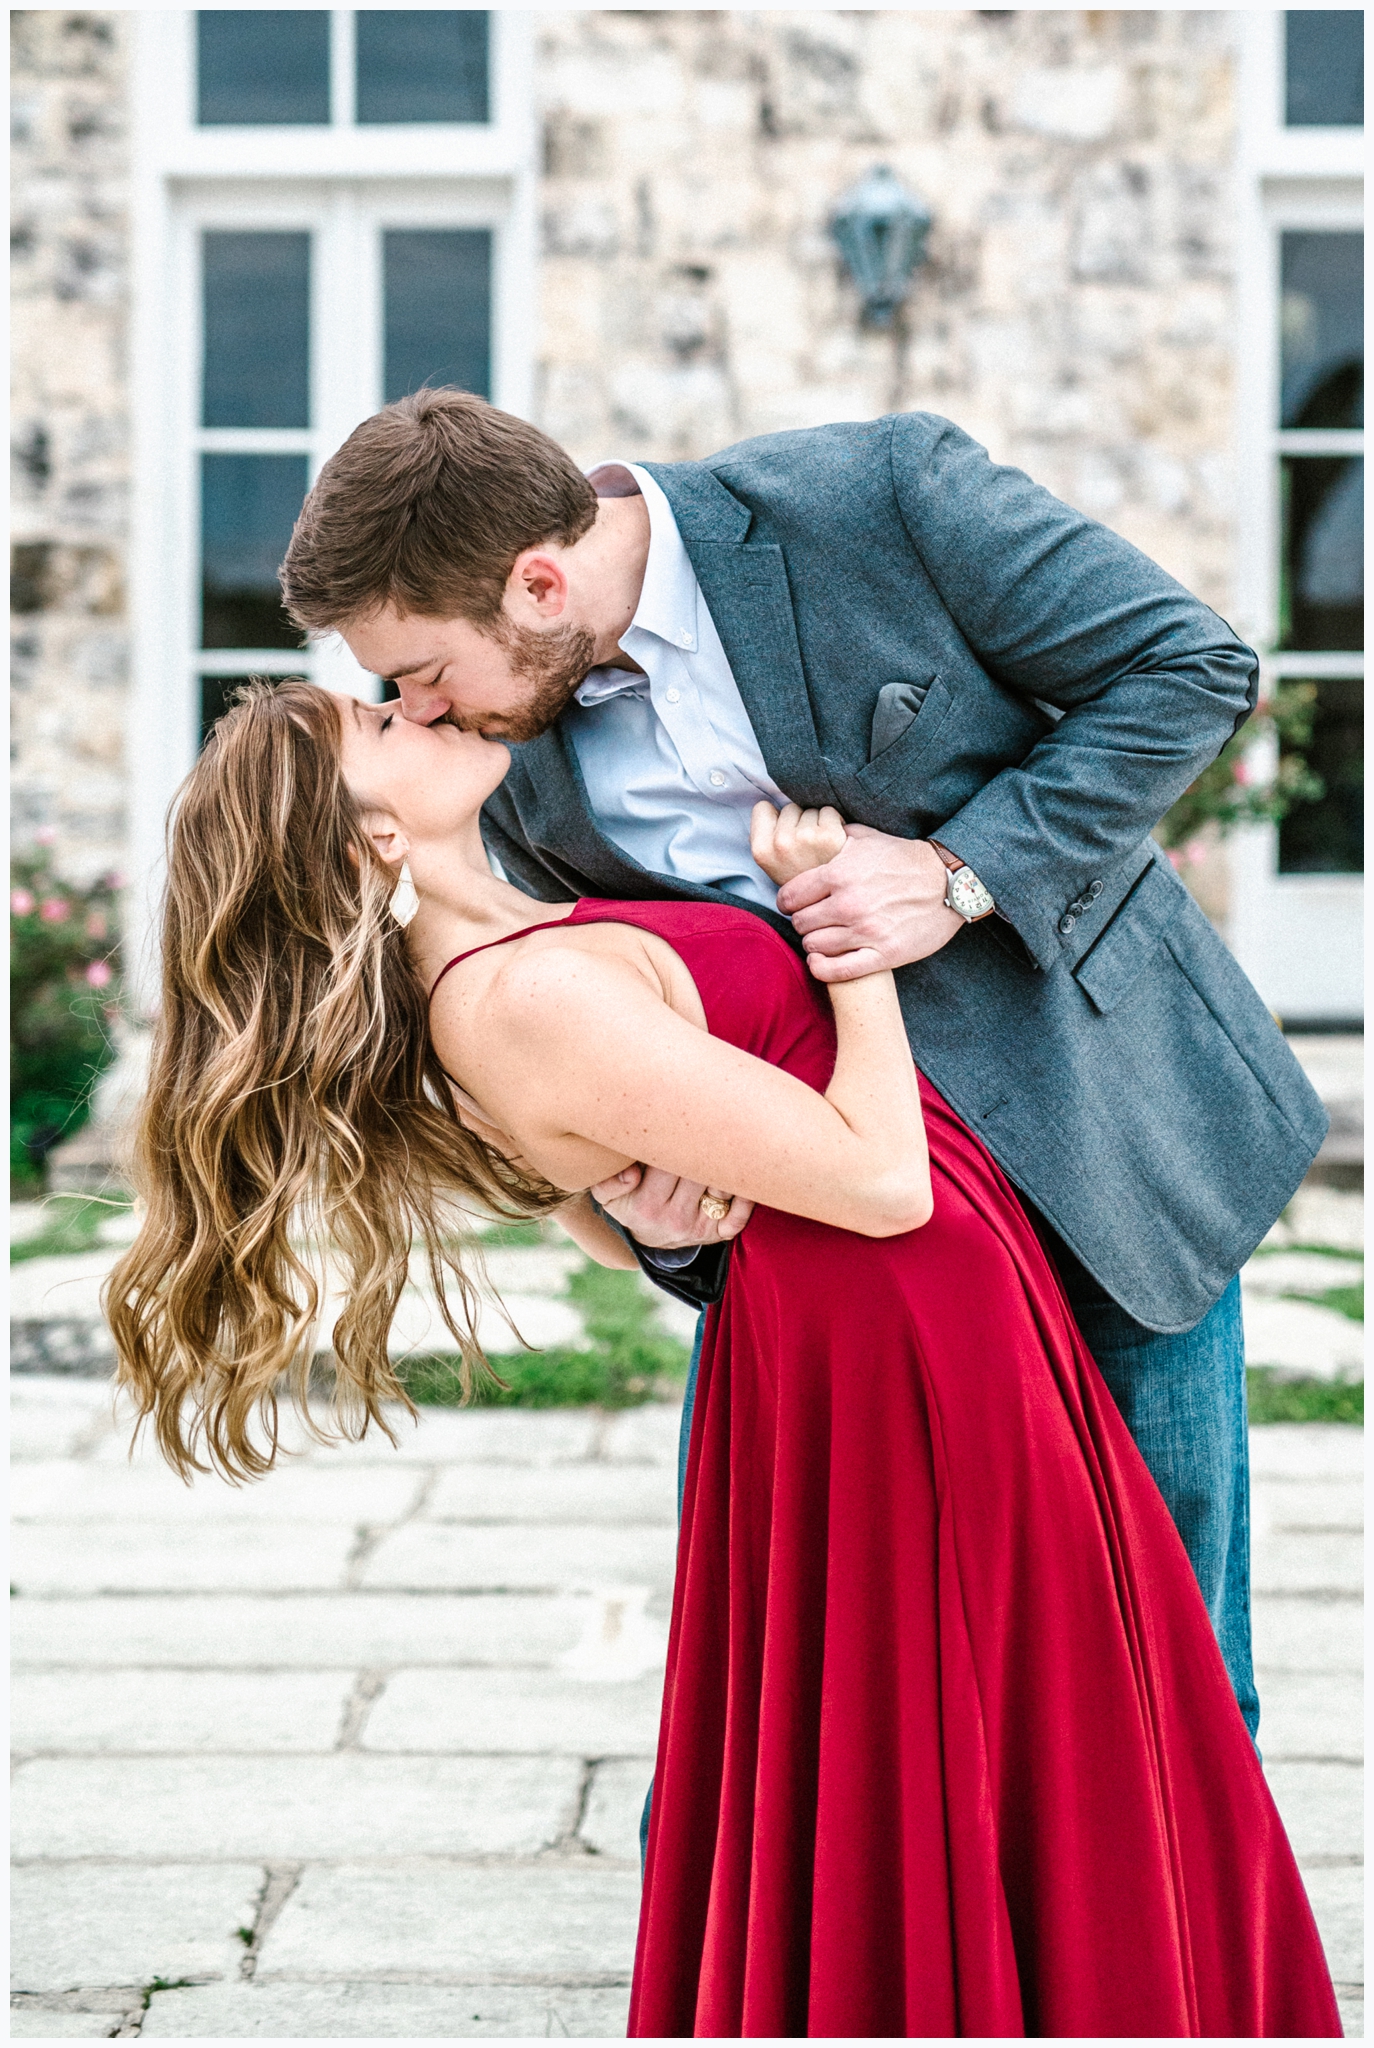 joslyn-holtfort-photography-engagement-session-le-san-michele-buda-texas_0021